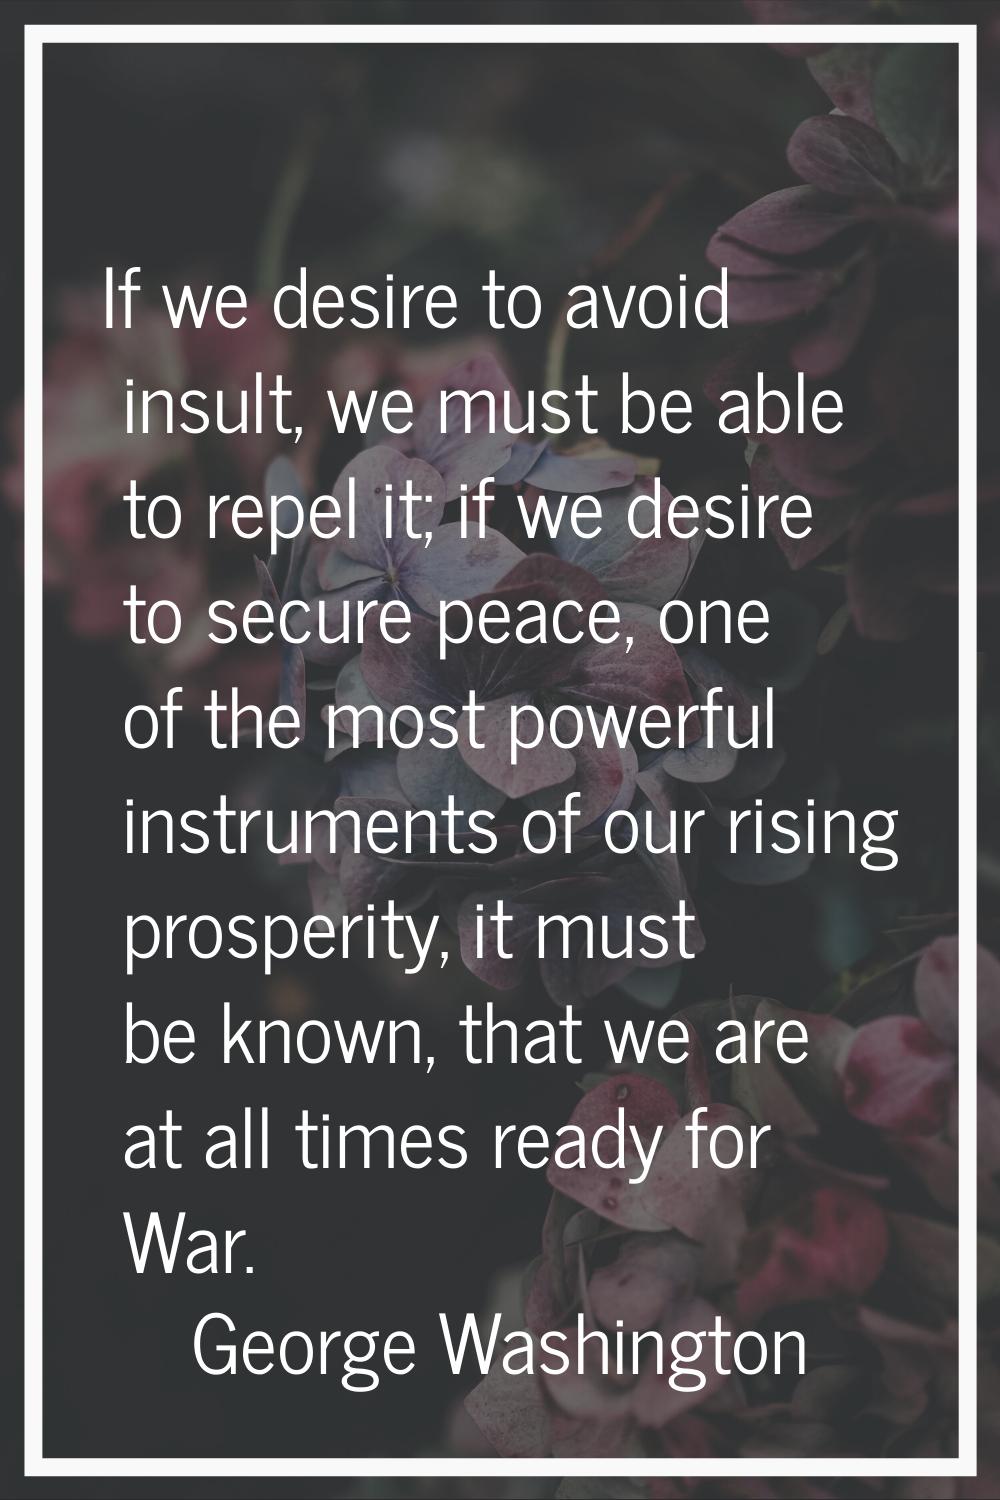 If we desire to avoid insult, we must be able to repel it; if we desire to secure peace, one of the